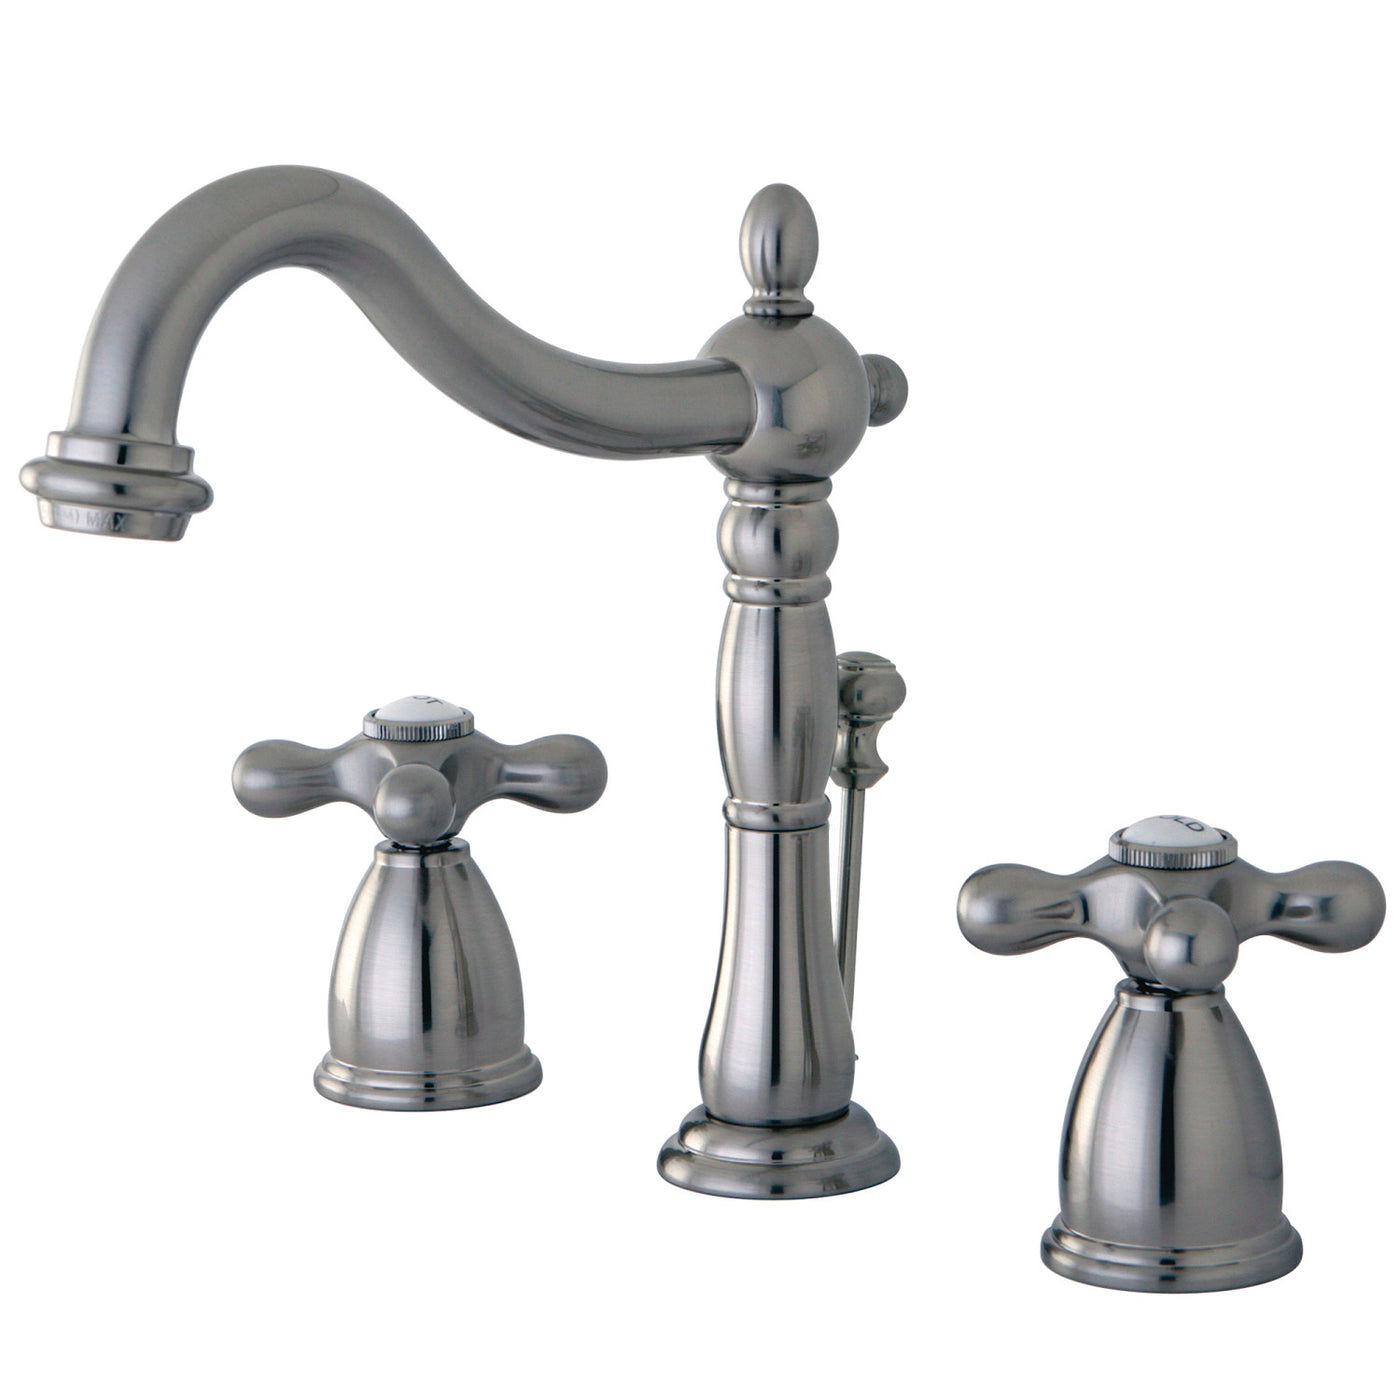 Elements of Design EB1978AX Widespread Bathroom Faucet with Plastic Pop-Up, Brushed Nickel